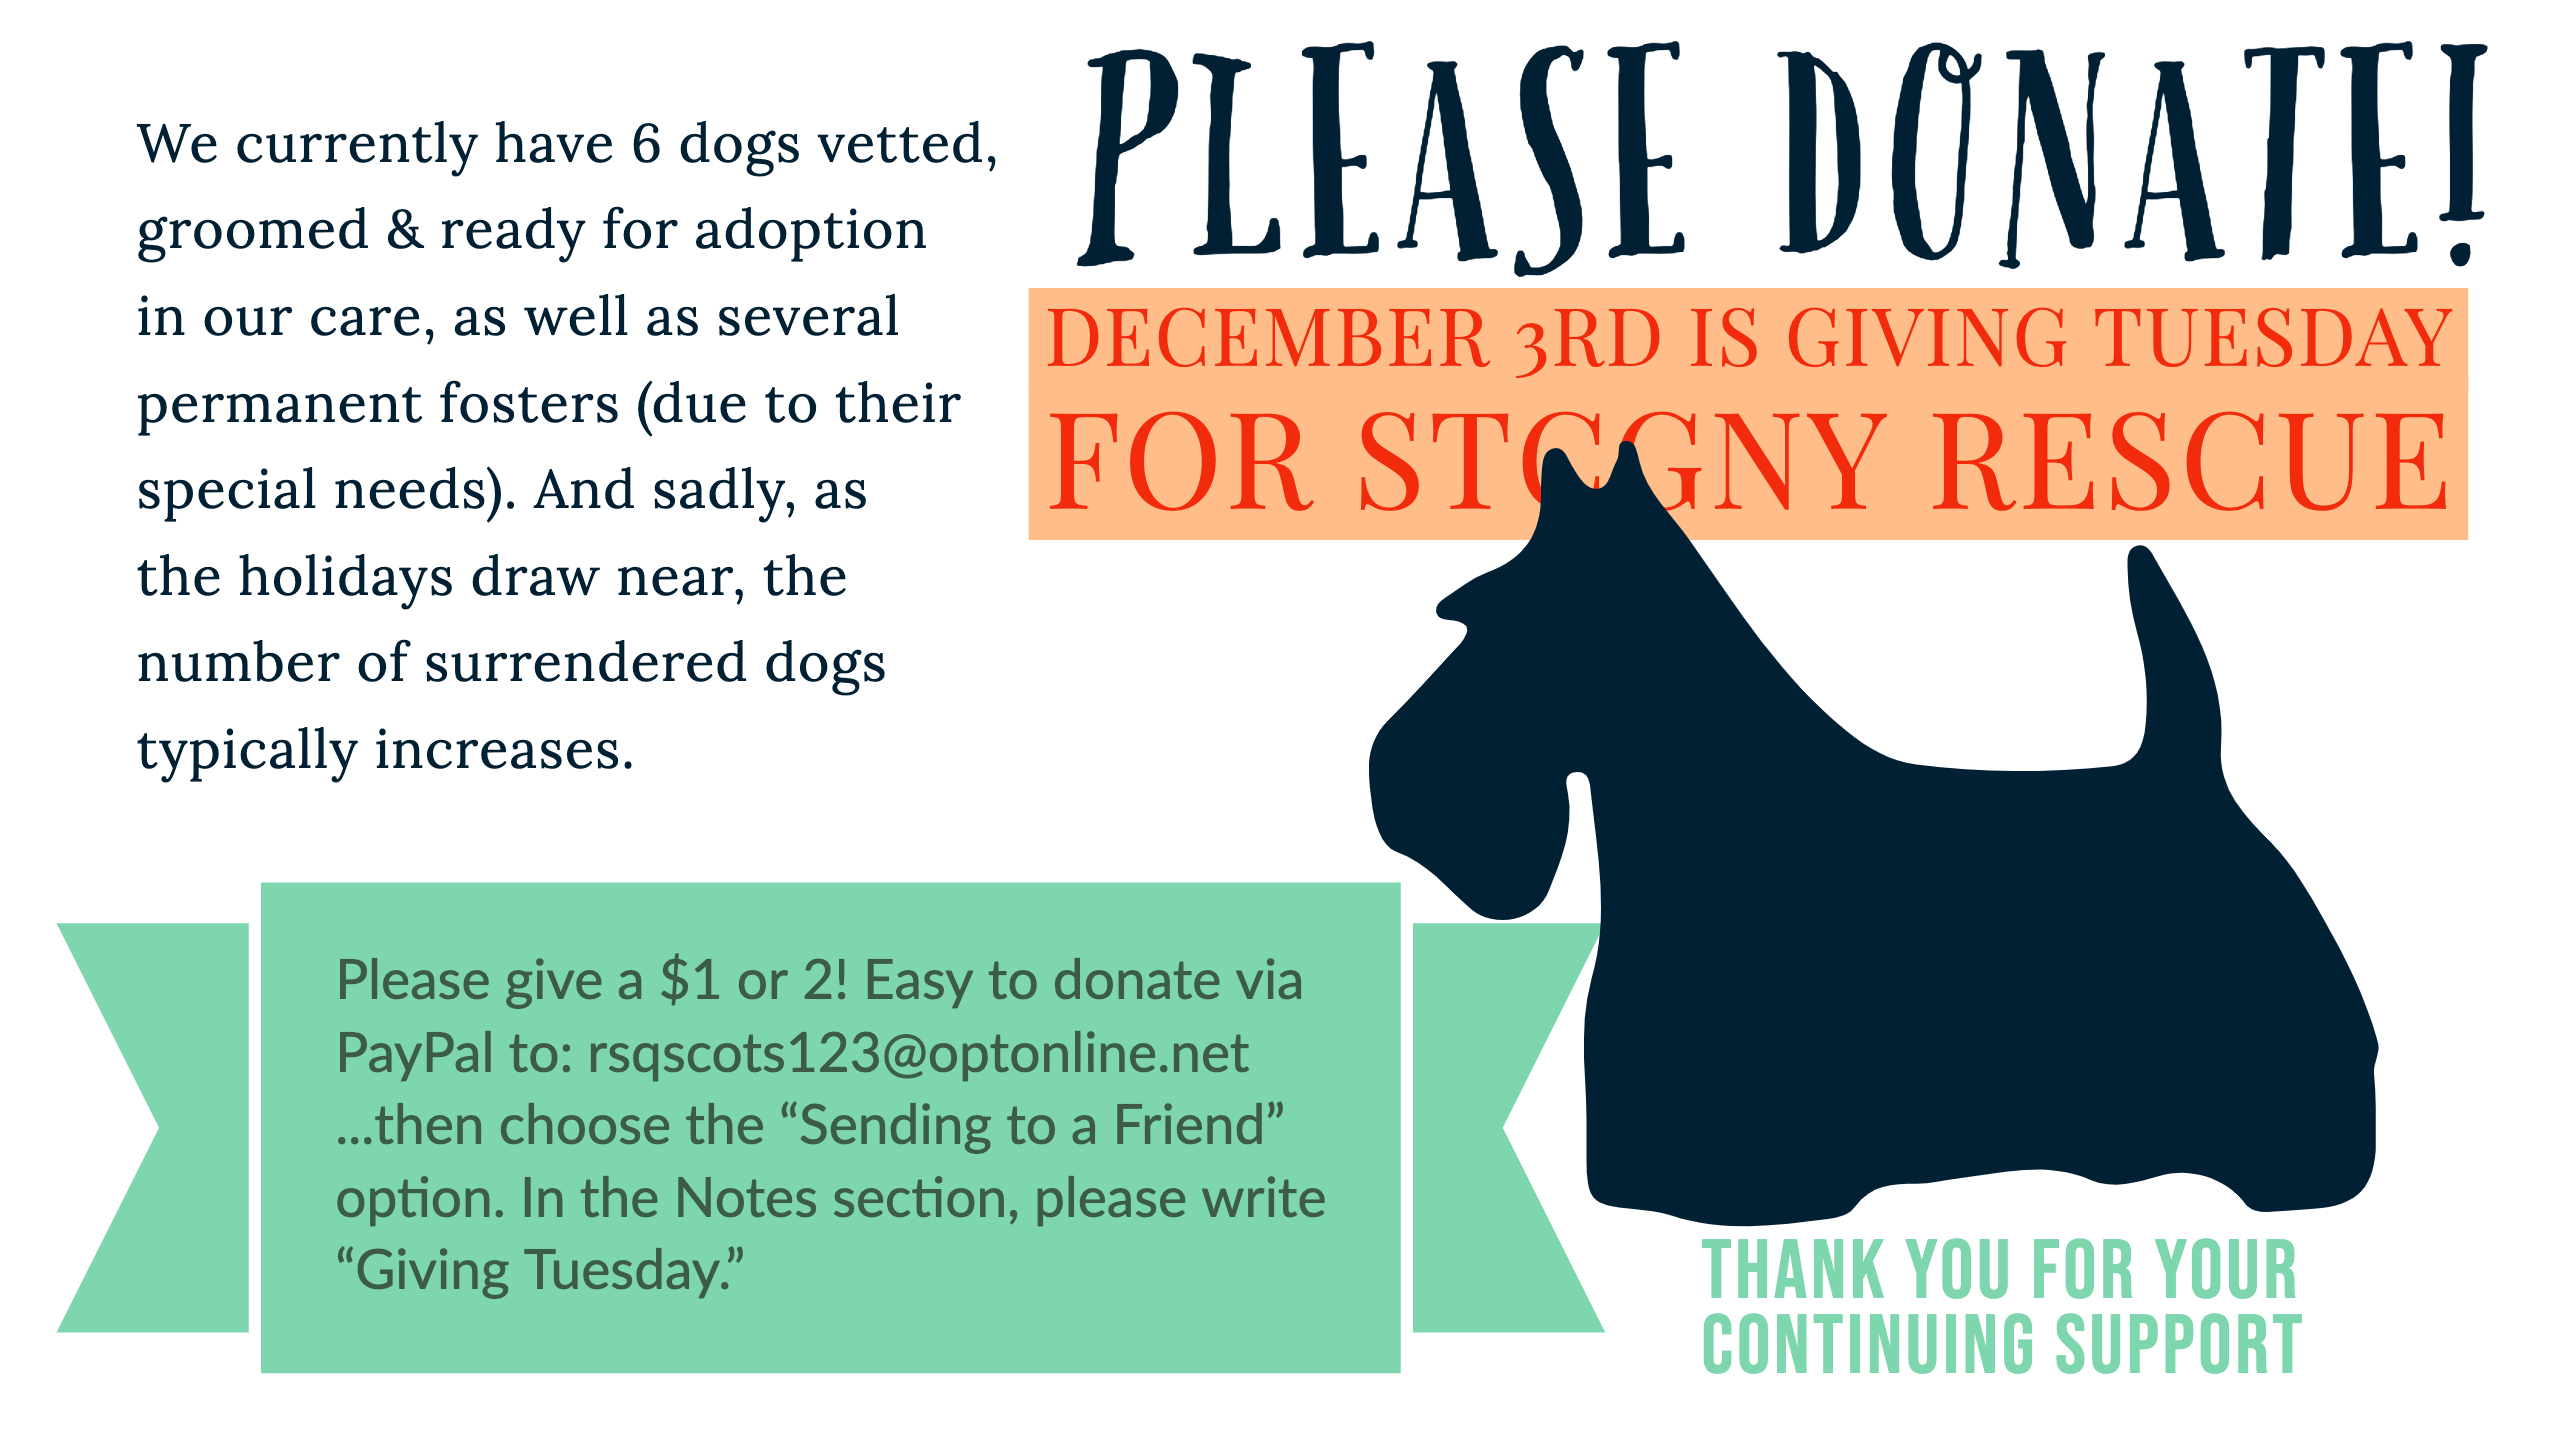 Giving Tuesday for STGCNY is December 3